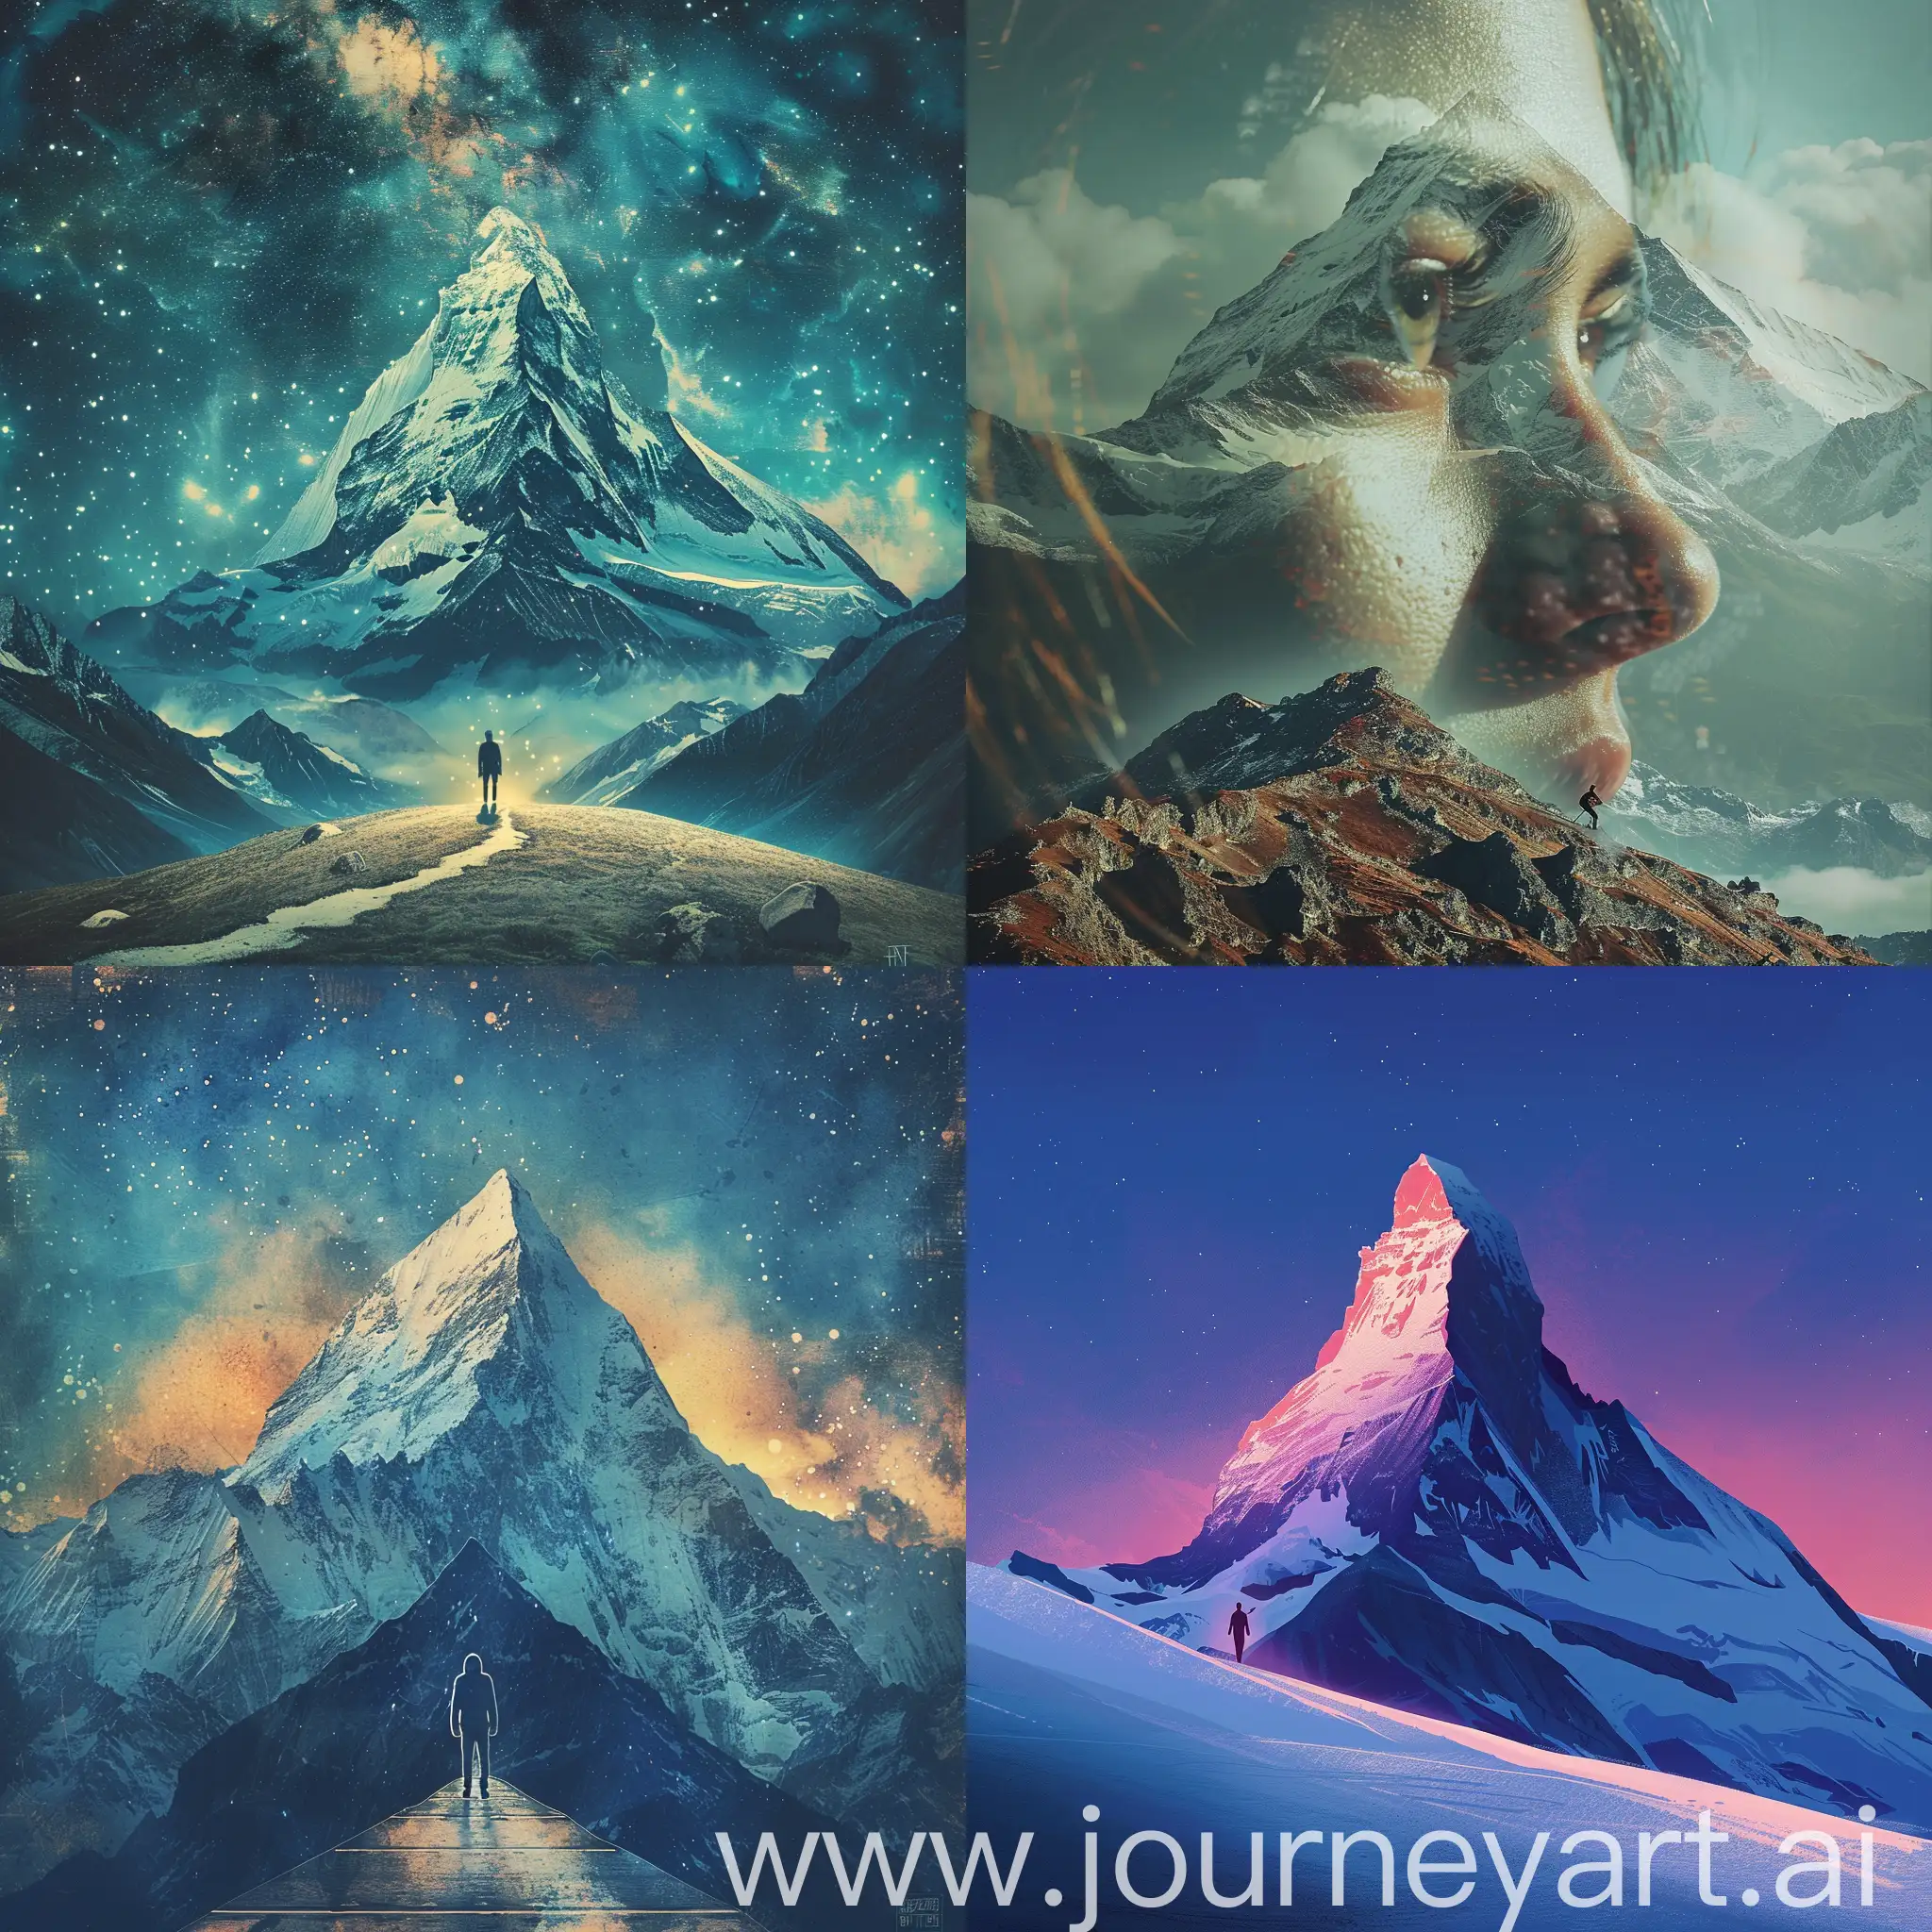 Visualize a person staring at a mountain representing their desire, and then depict them taking the first step towards climbing it, symbolizing undertaking.